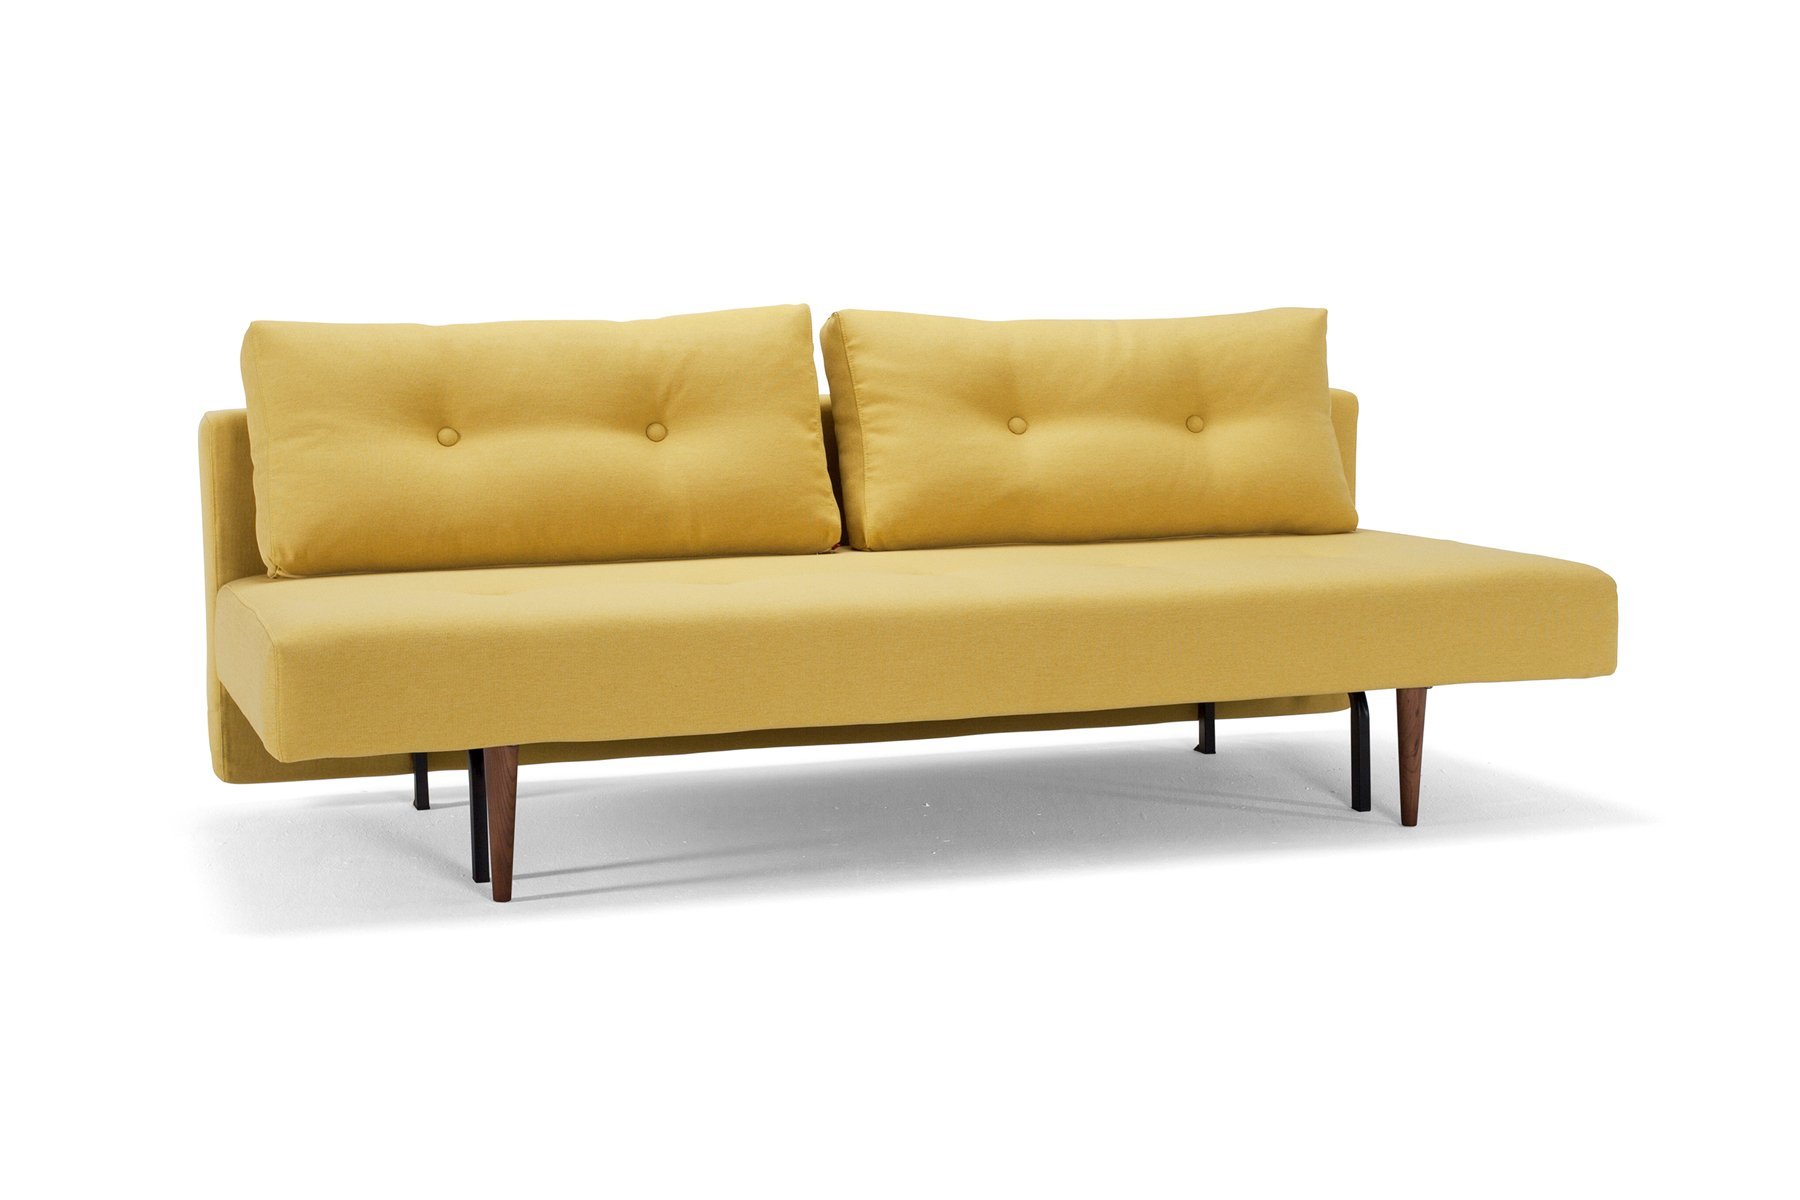 Recast Sofa Bed Furniture-Living Room-Daybeds & Sleepers